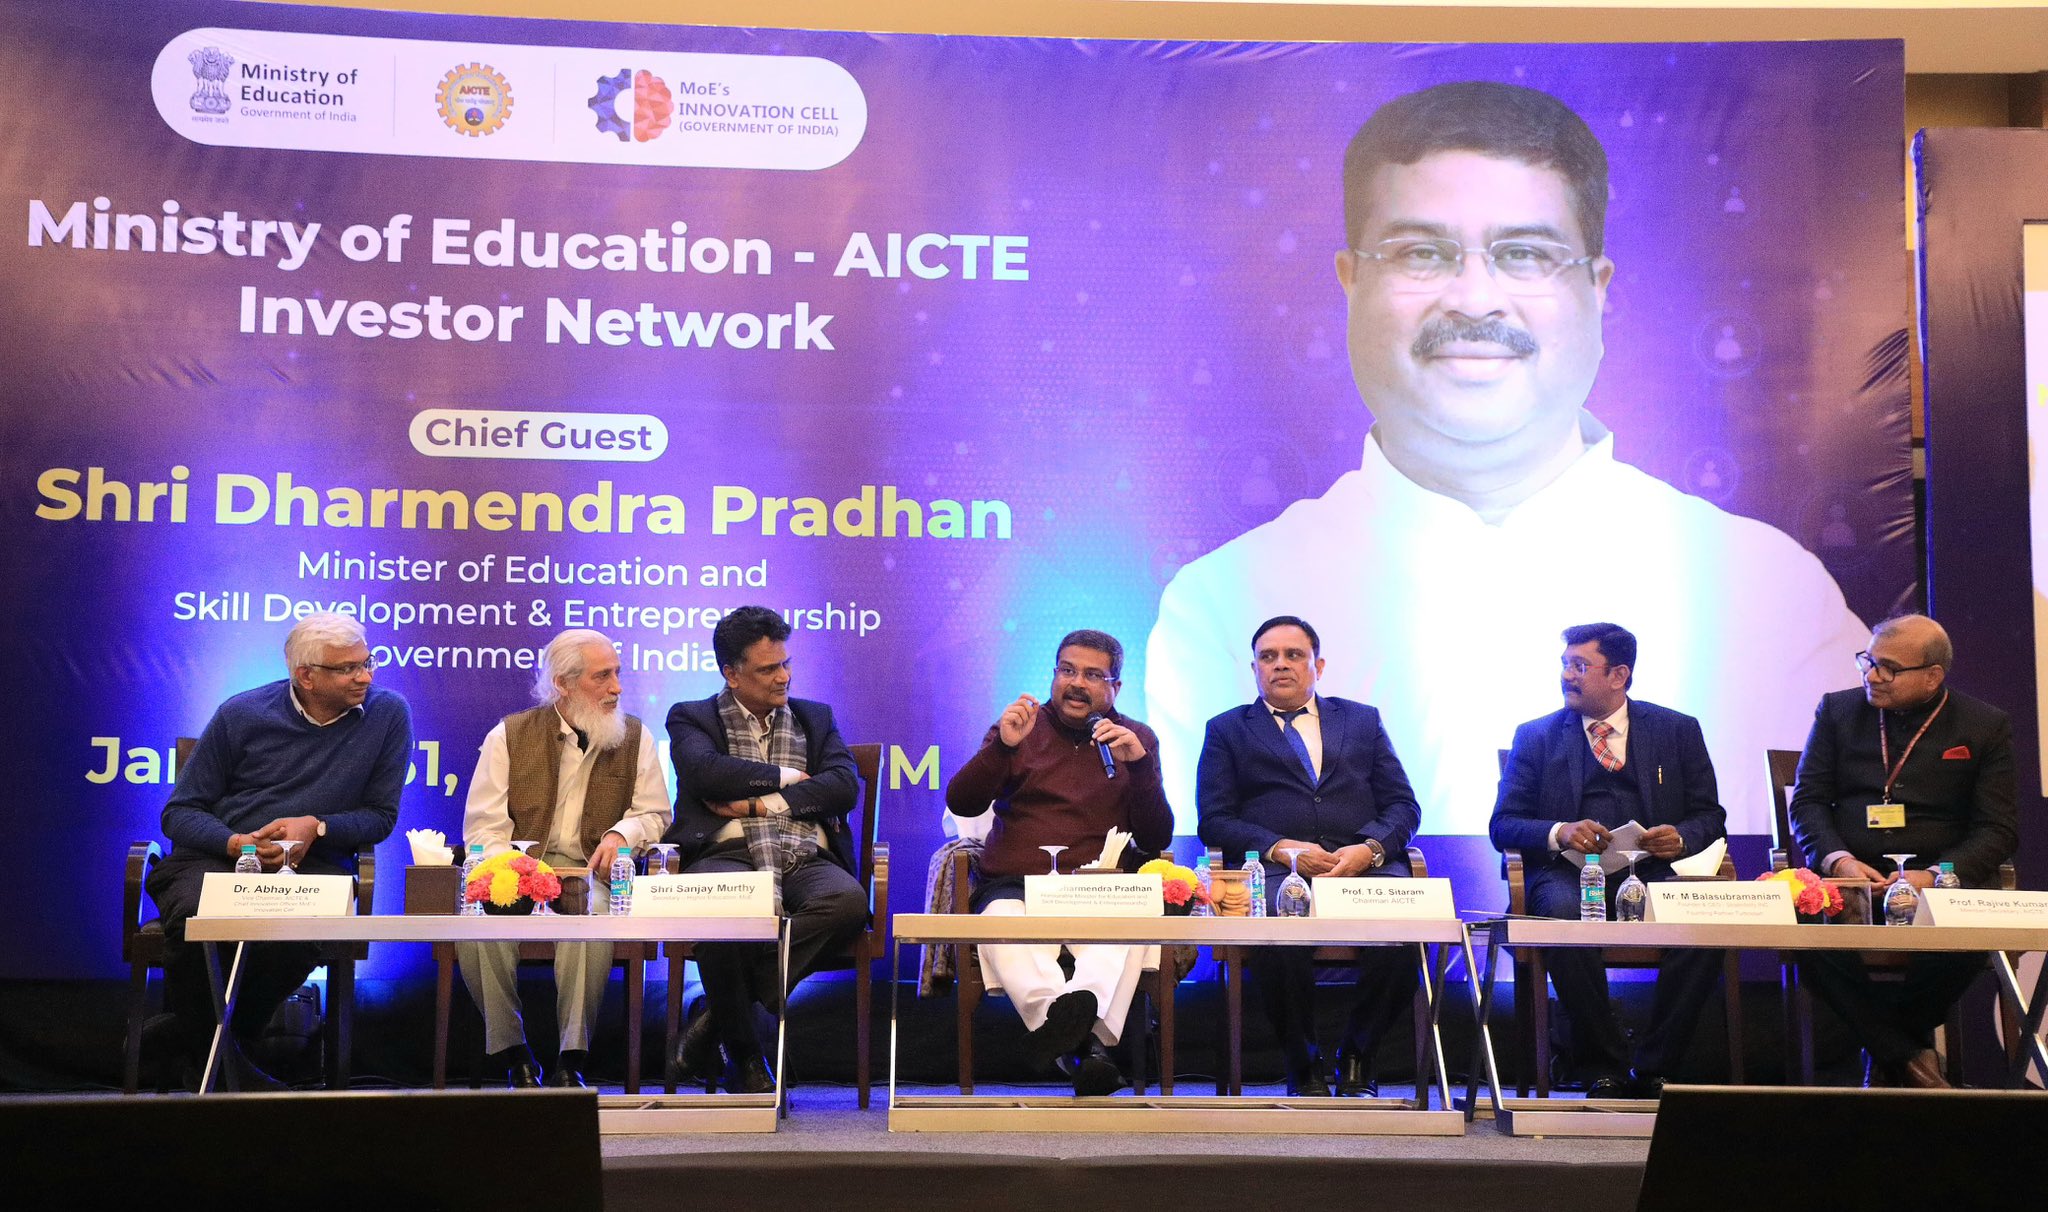 Union Minister Dharmendra Pradhan launches ‘Ministry of Education - AICTE Investor Network’ in New Delhi